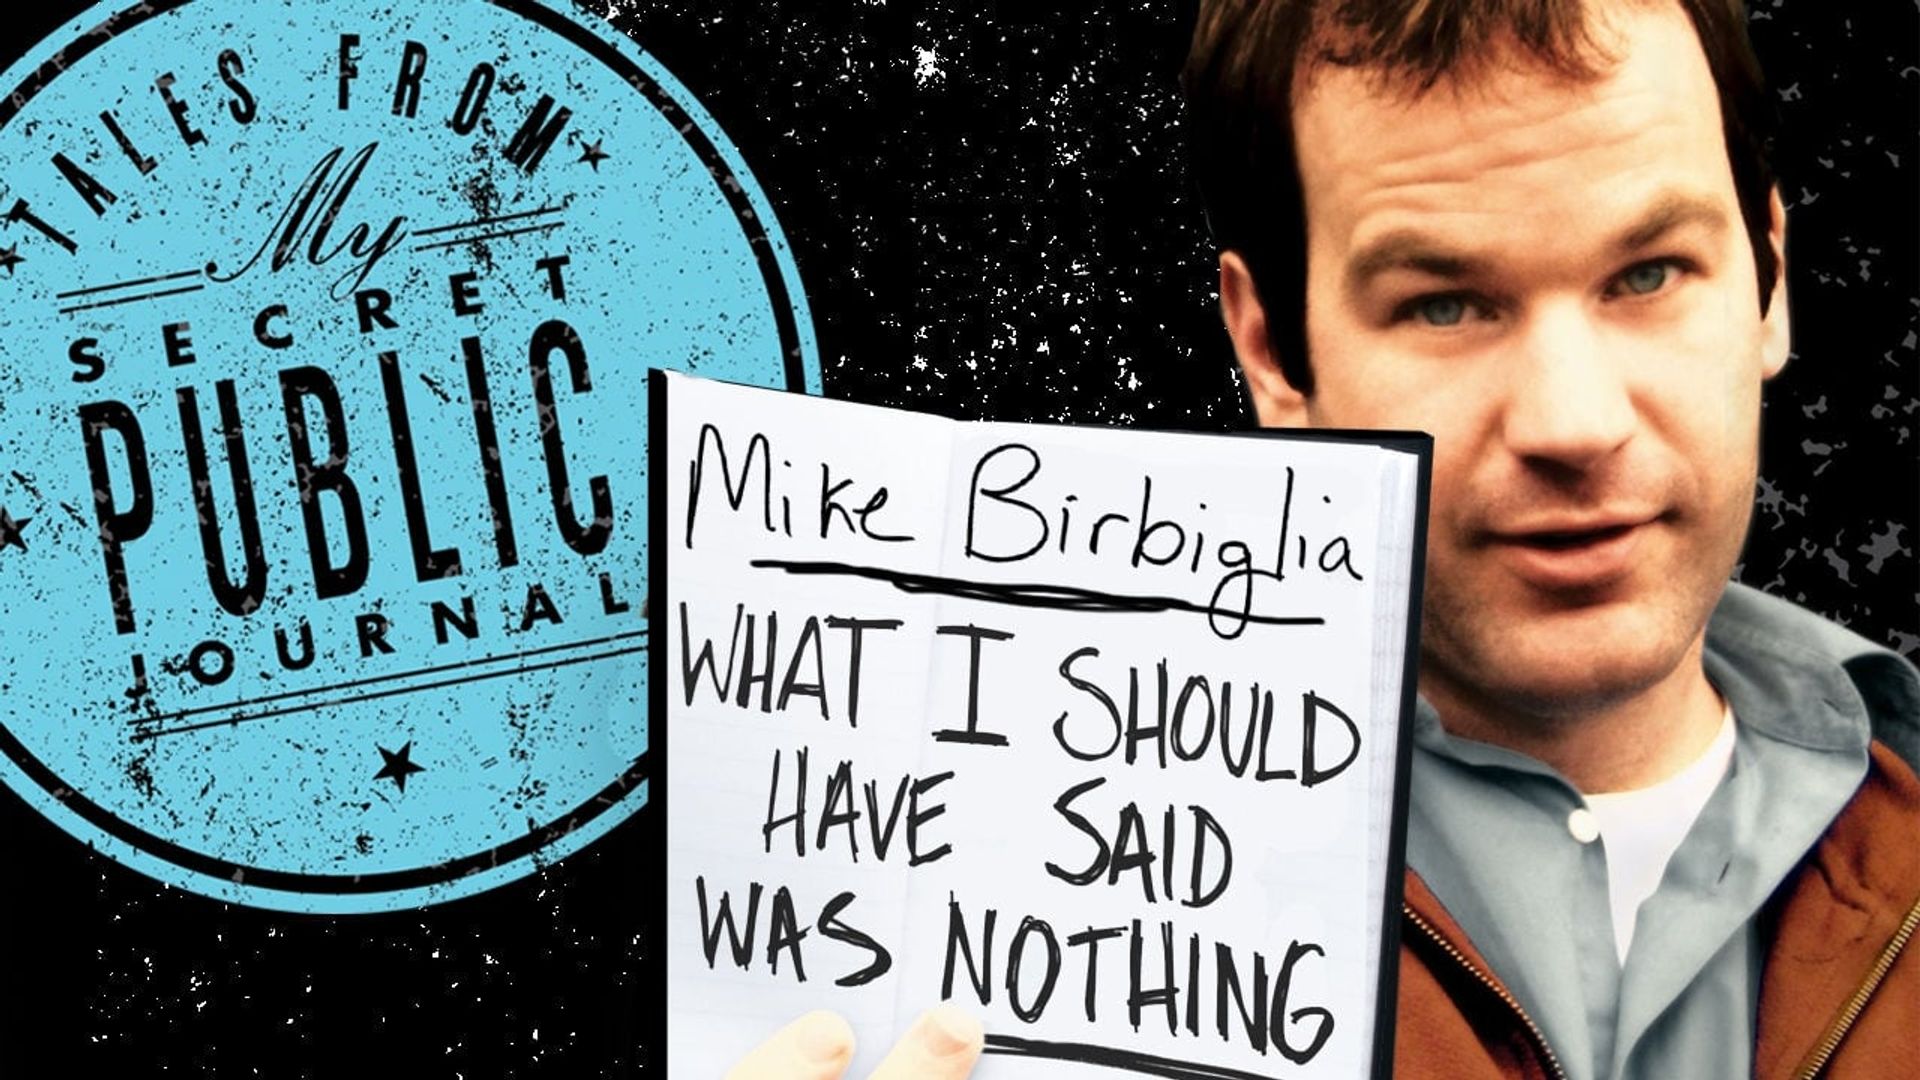 Mike Birbiglia: What I Should Have Said Was Nothing background